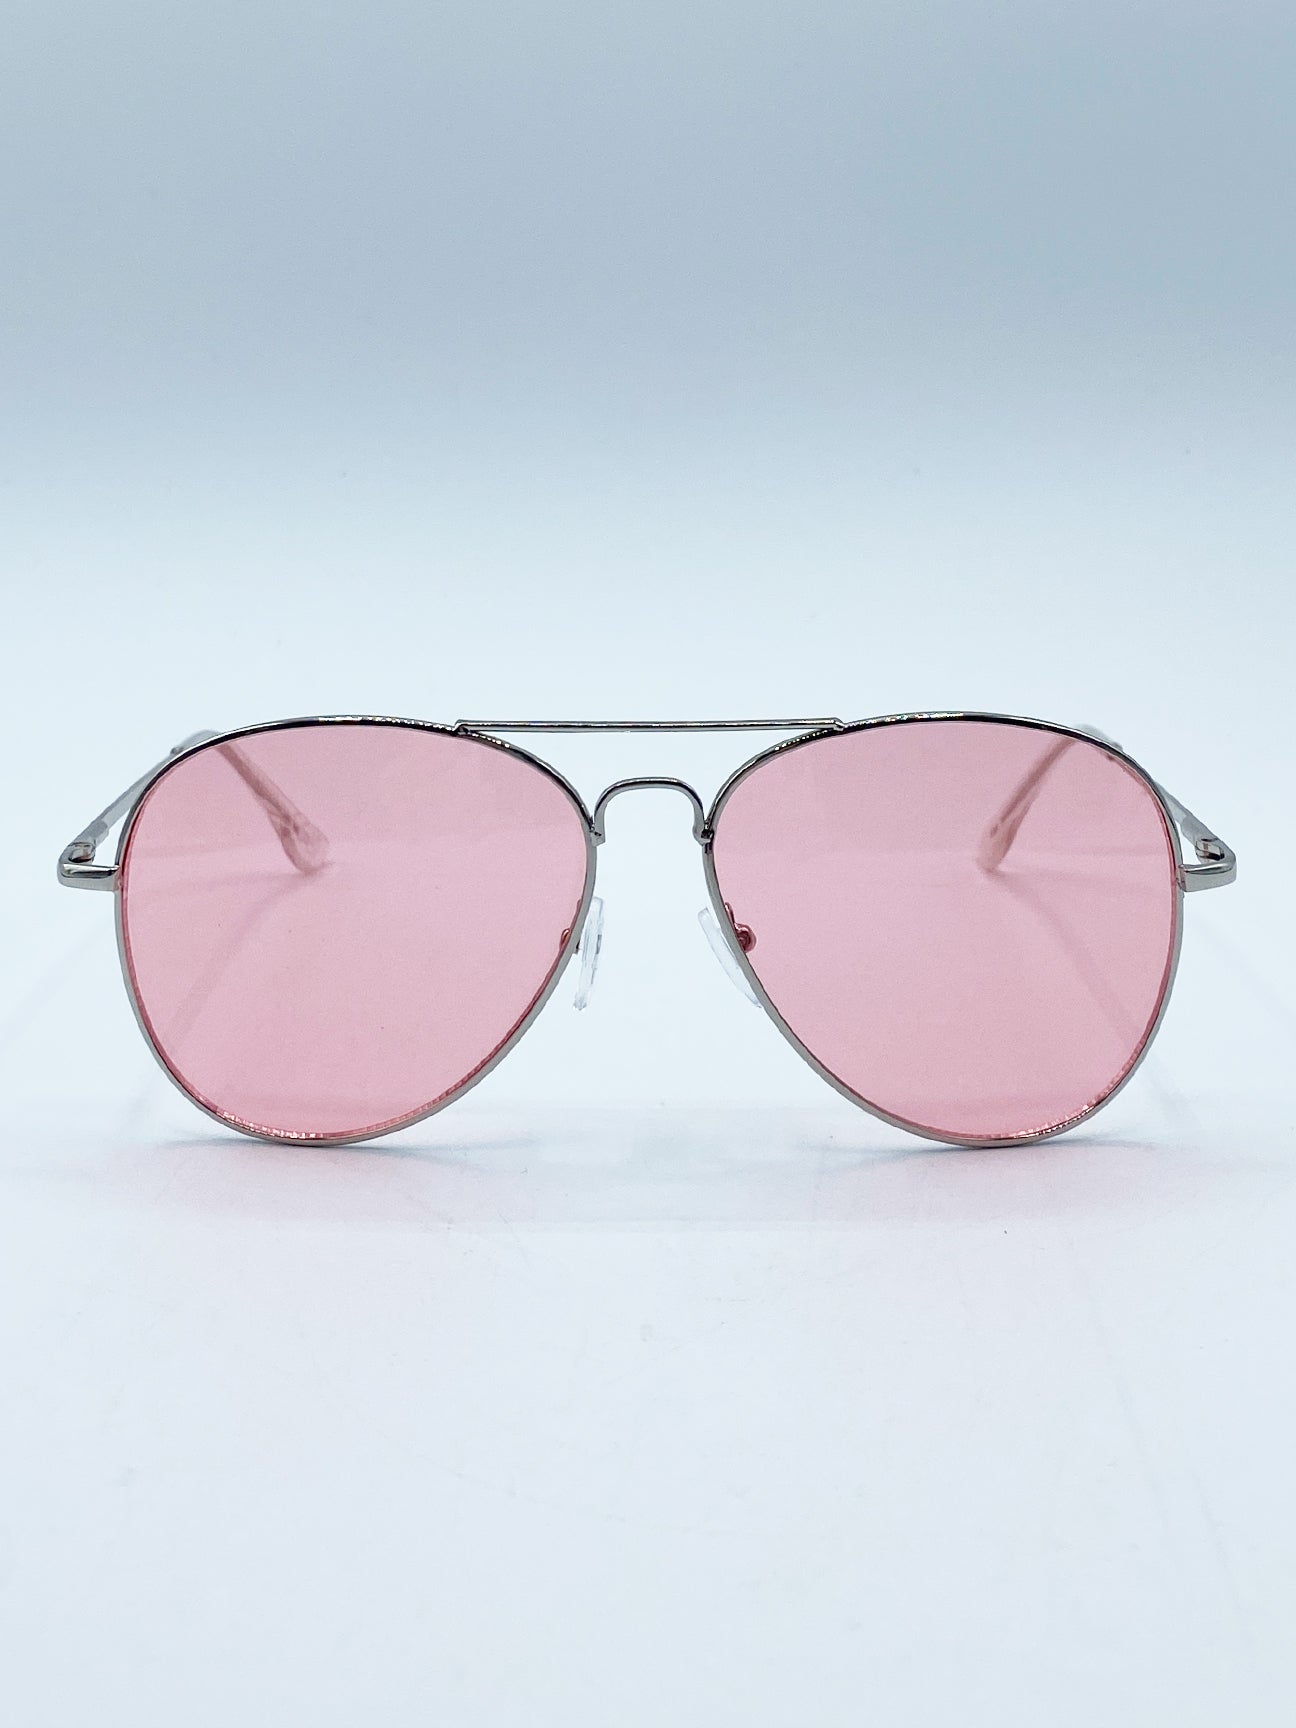 Silver Frame Aviators with Pink Lenses